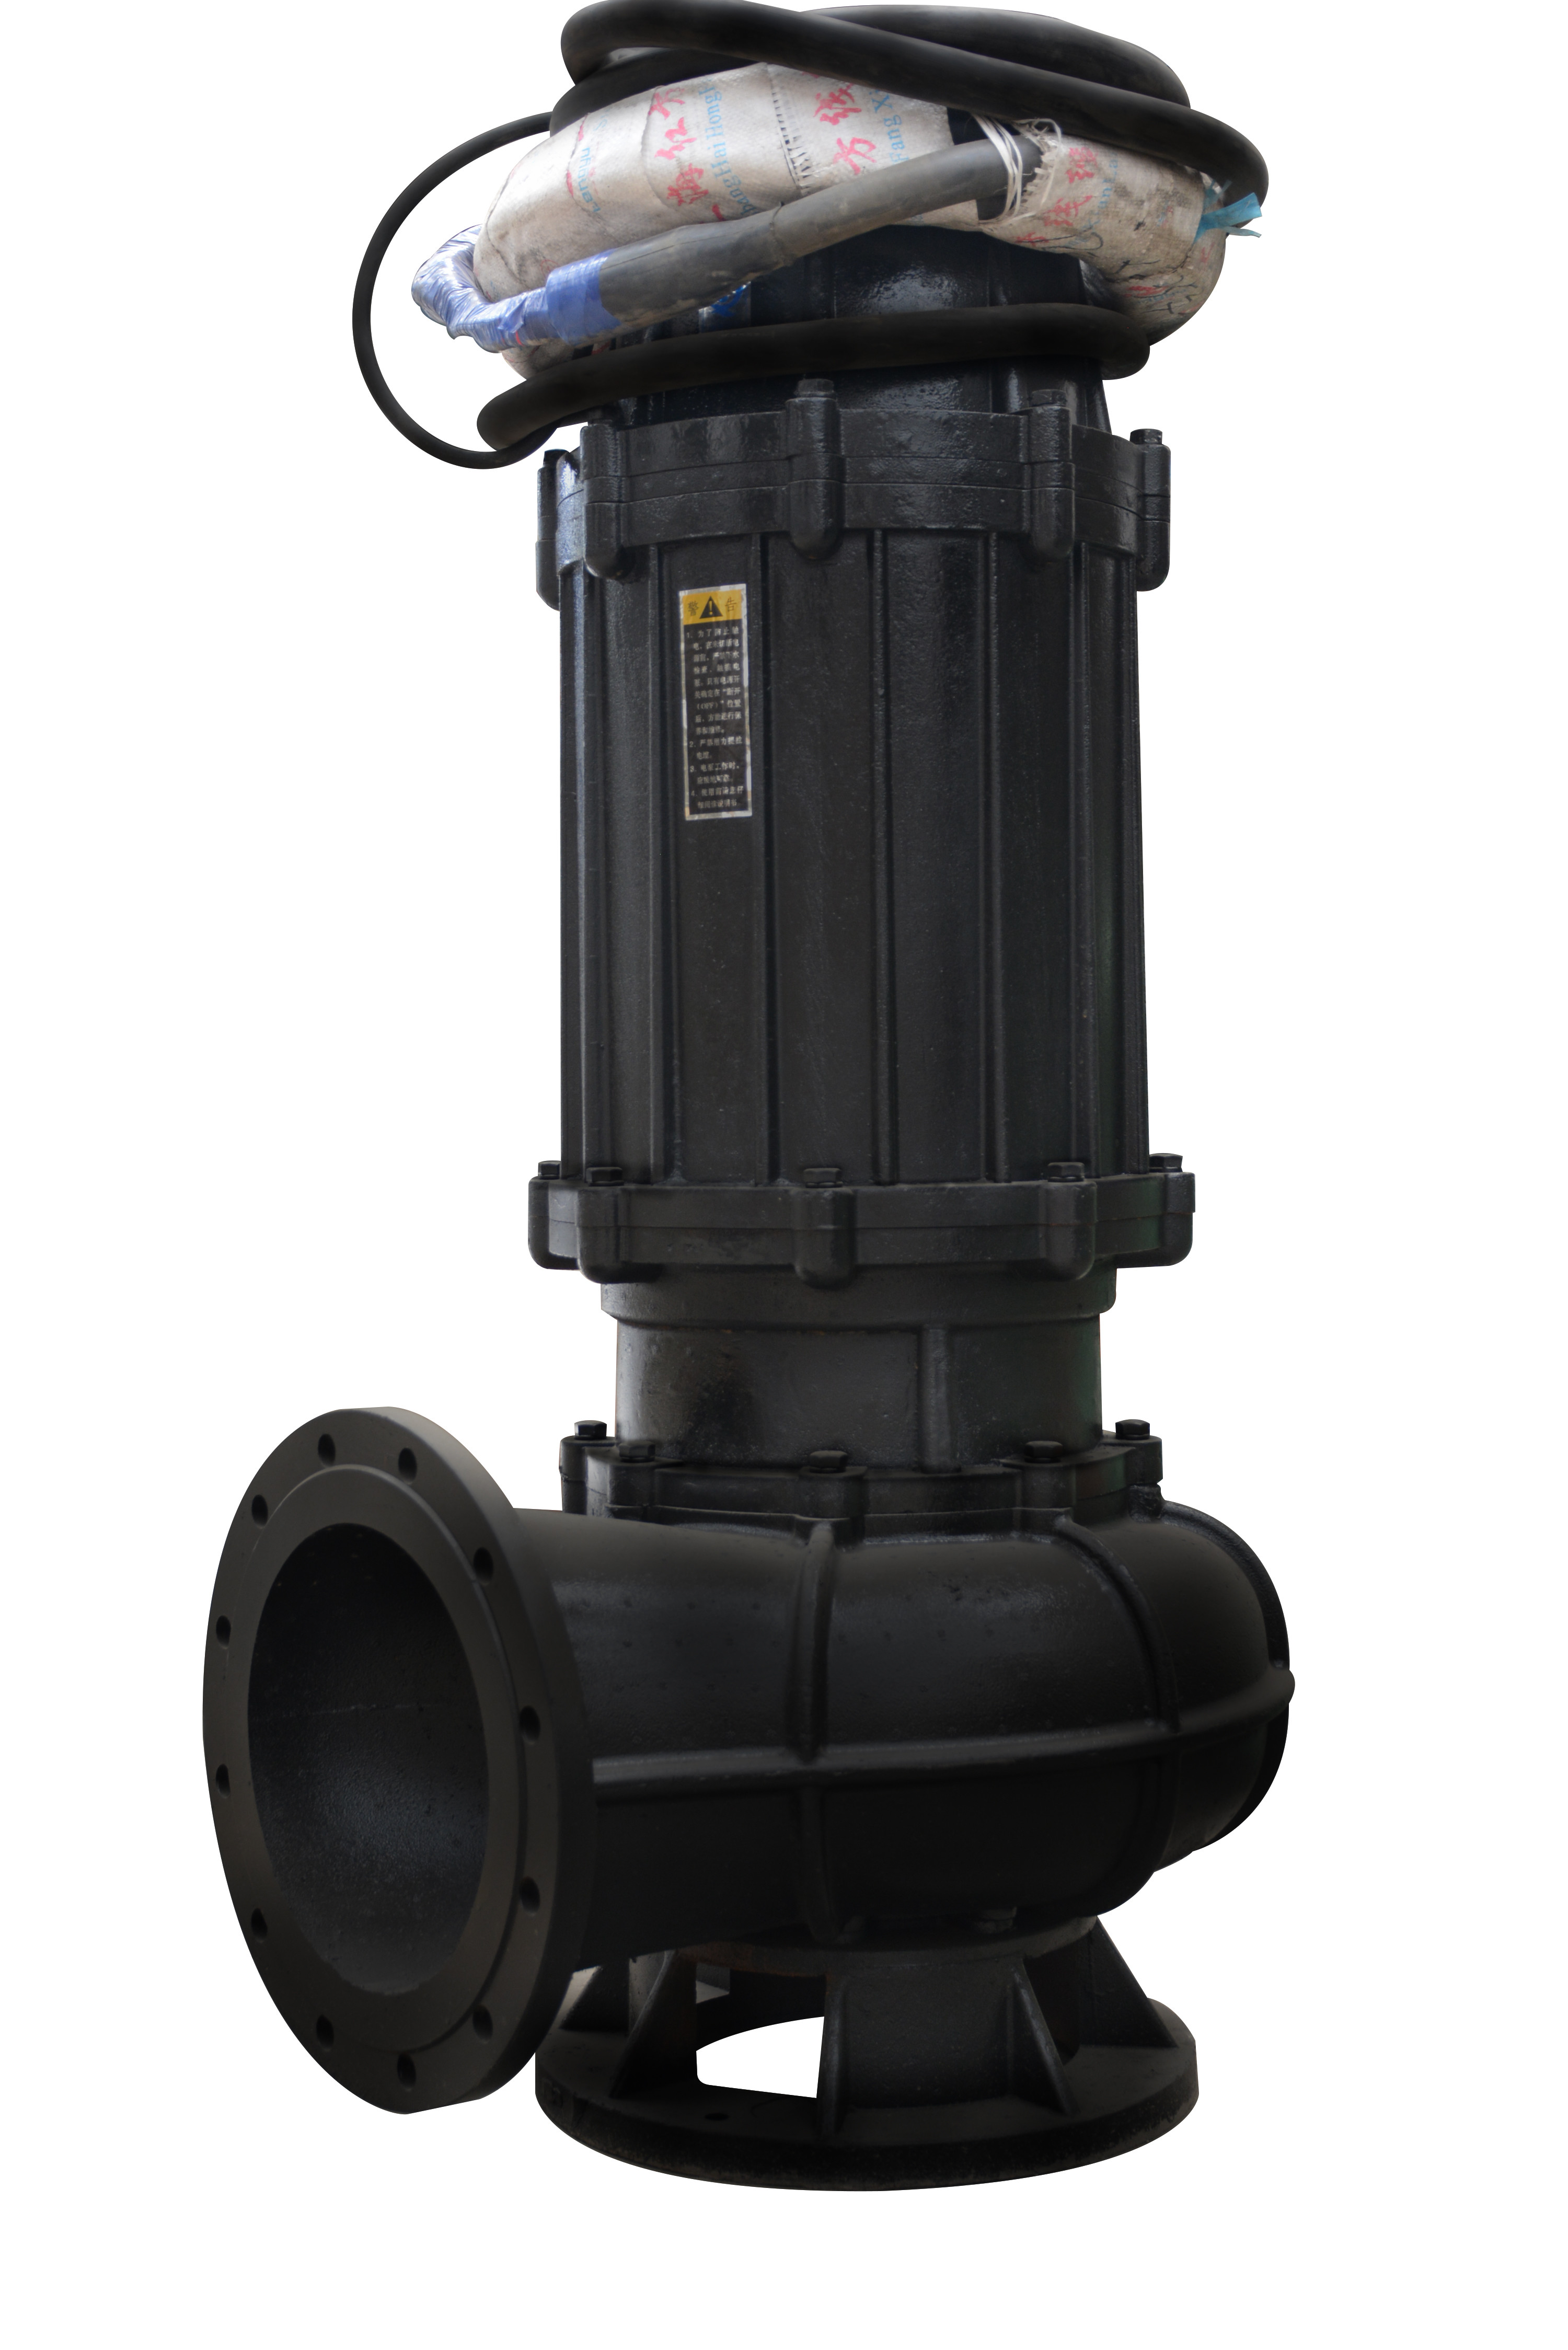 7 - 40m Head Submersible Dirty Water Pump 380v / 440v Voltage Vertical Best Water Pump For 6.7 Cummins